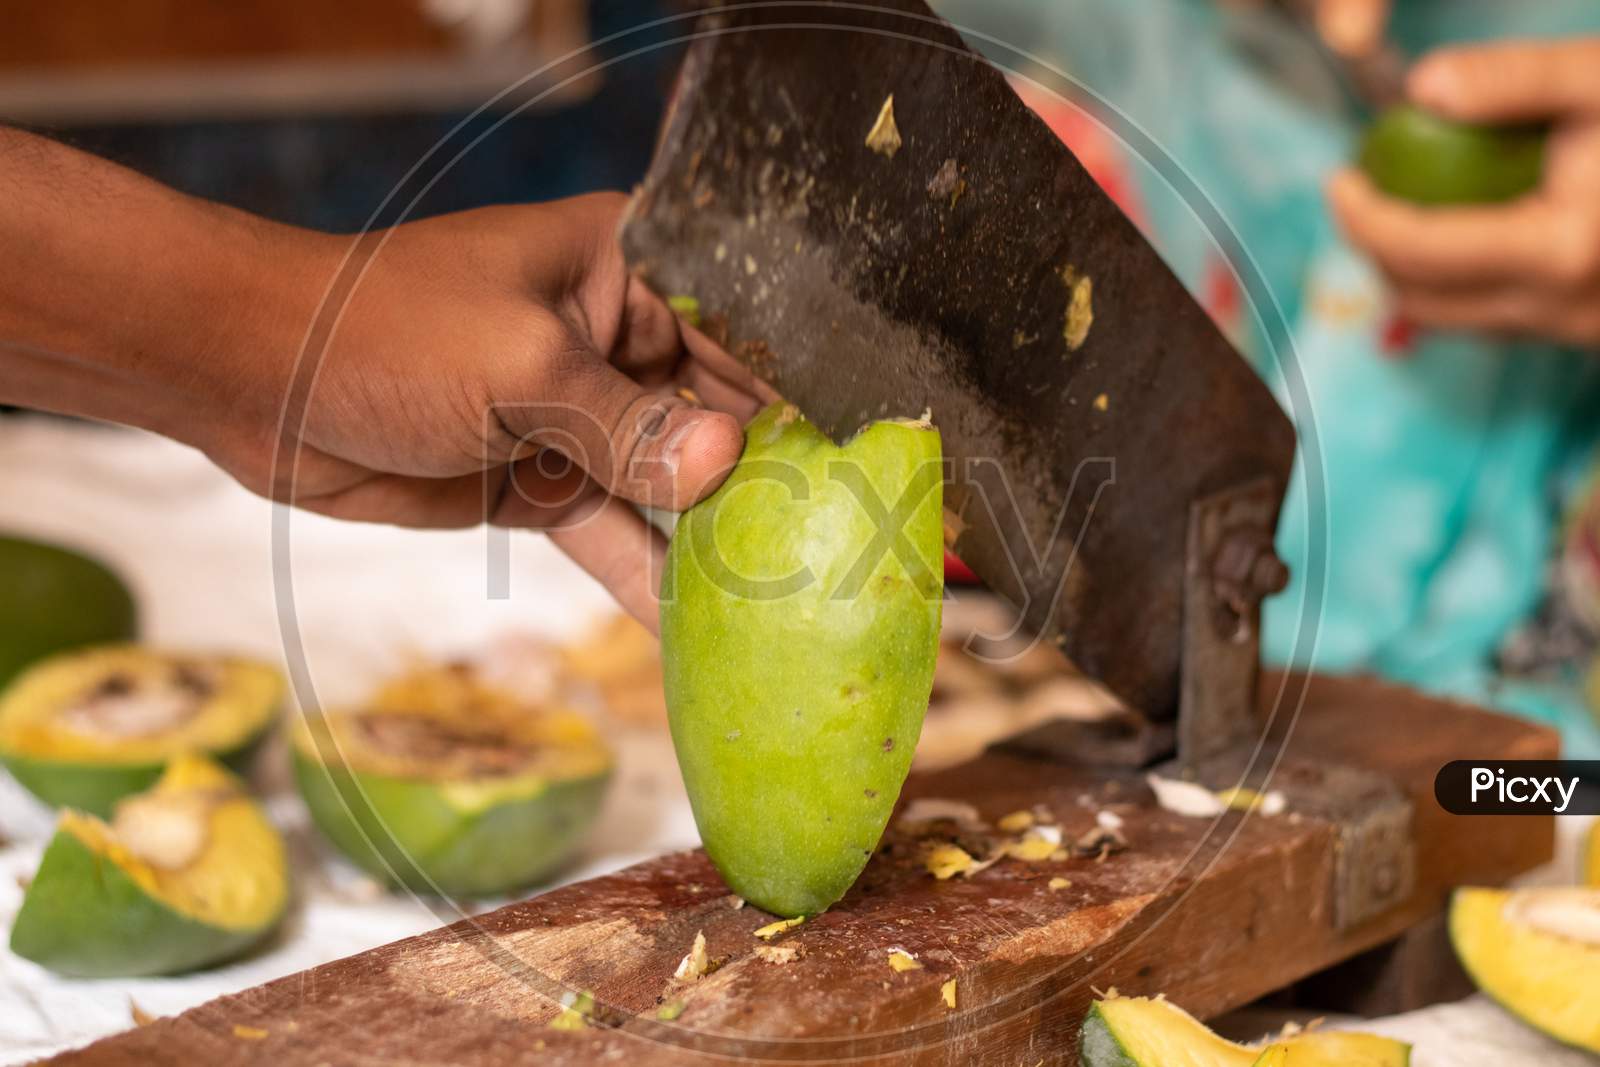 Closeuof Handing Cutting Ripe Mango For Making Picke In India With Indian Vegetable Cutter.